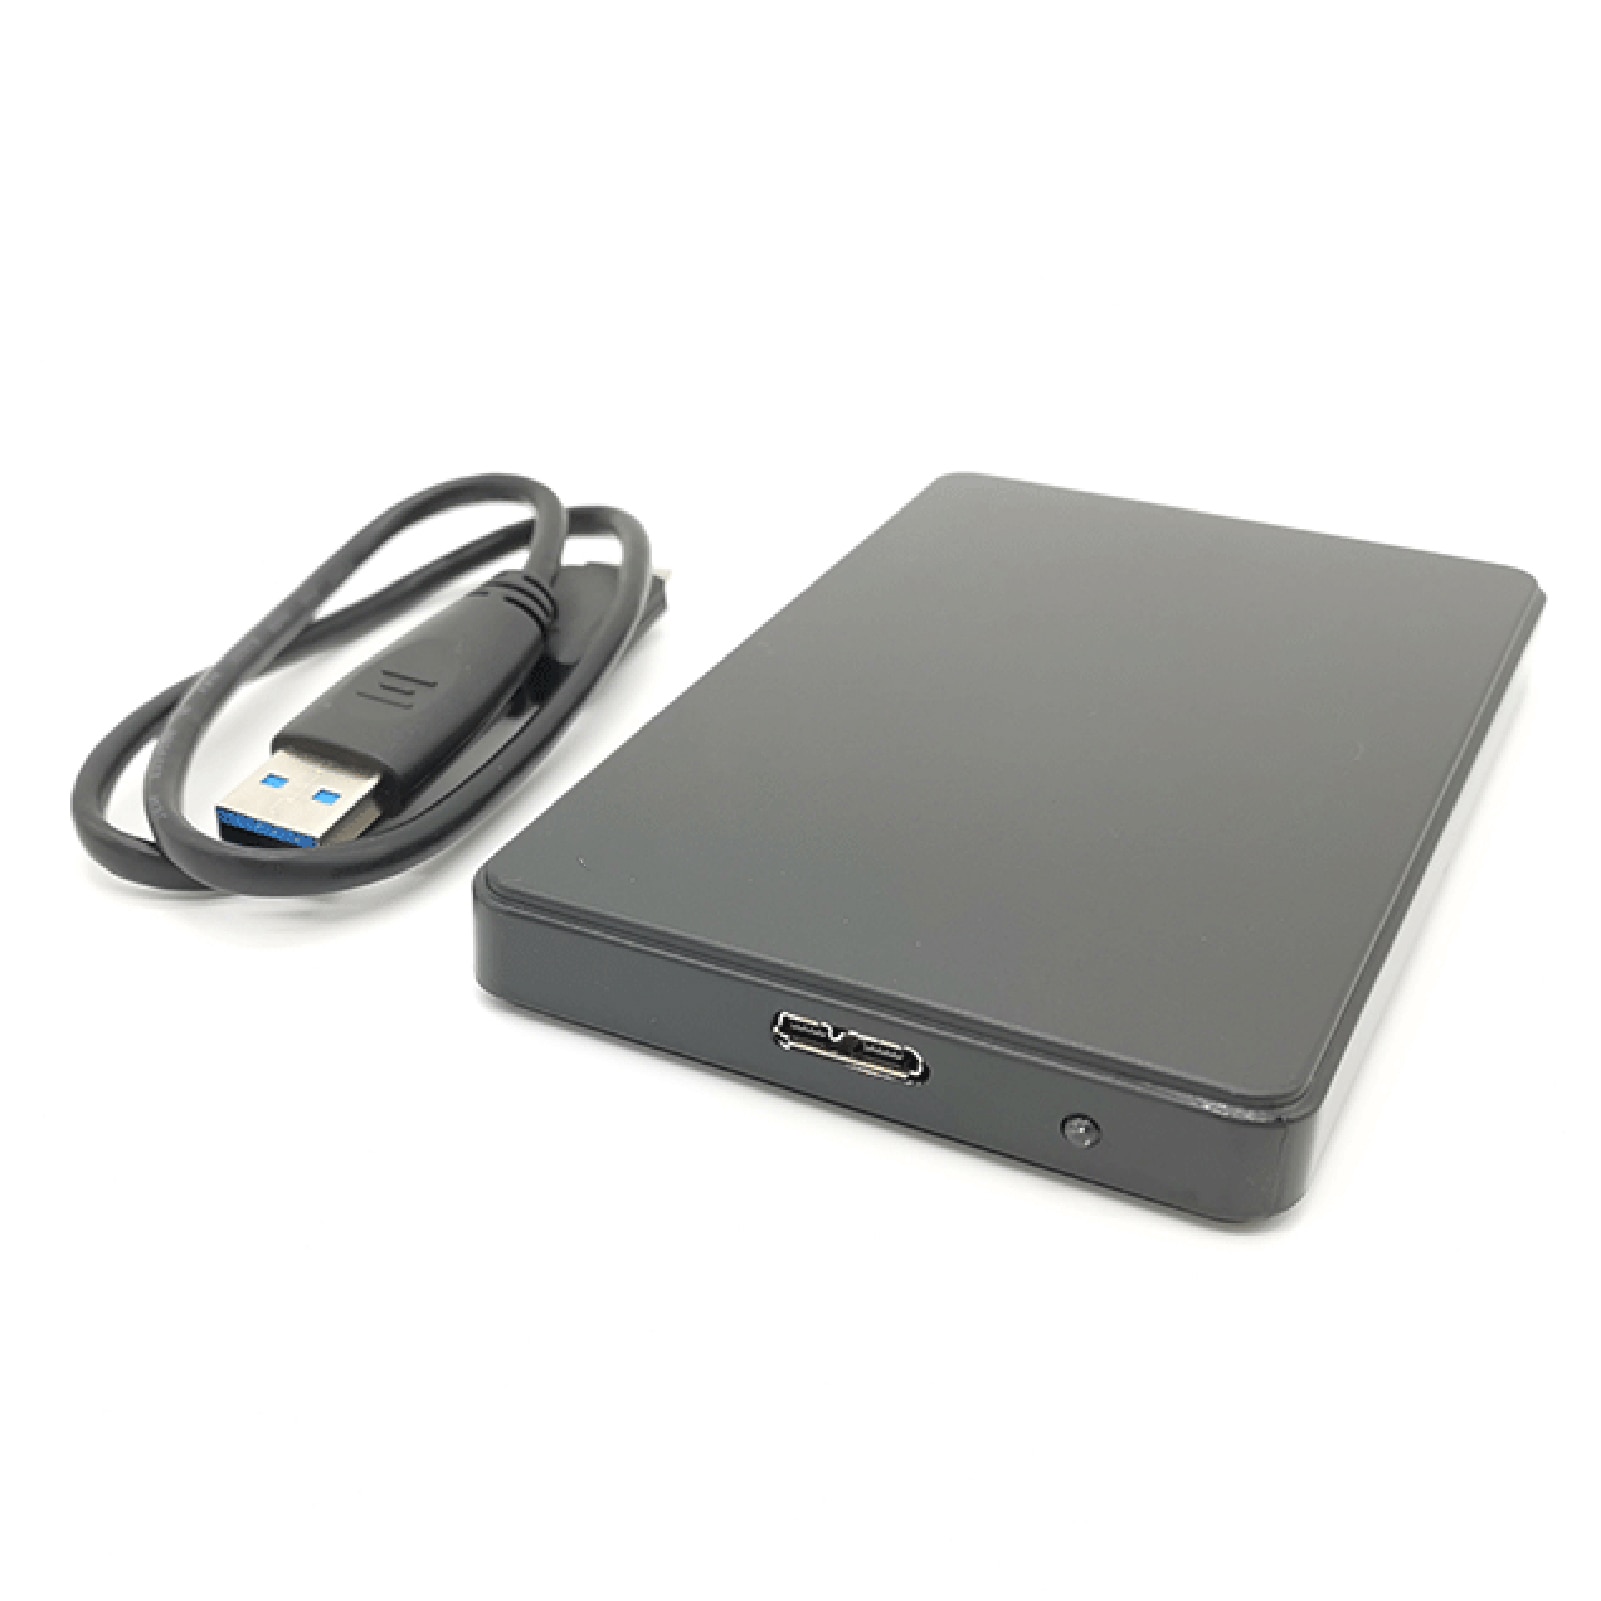 Ssd Case 2.5 Inch Sata Naar Usb 3.0 Hard Disk Case Tool 5Gbps Mobiele Draagbare Ssd Behuizing